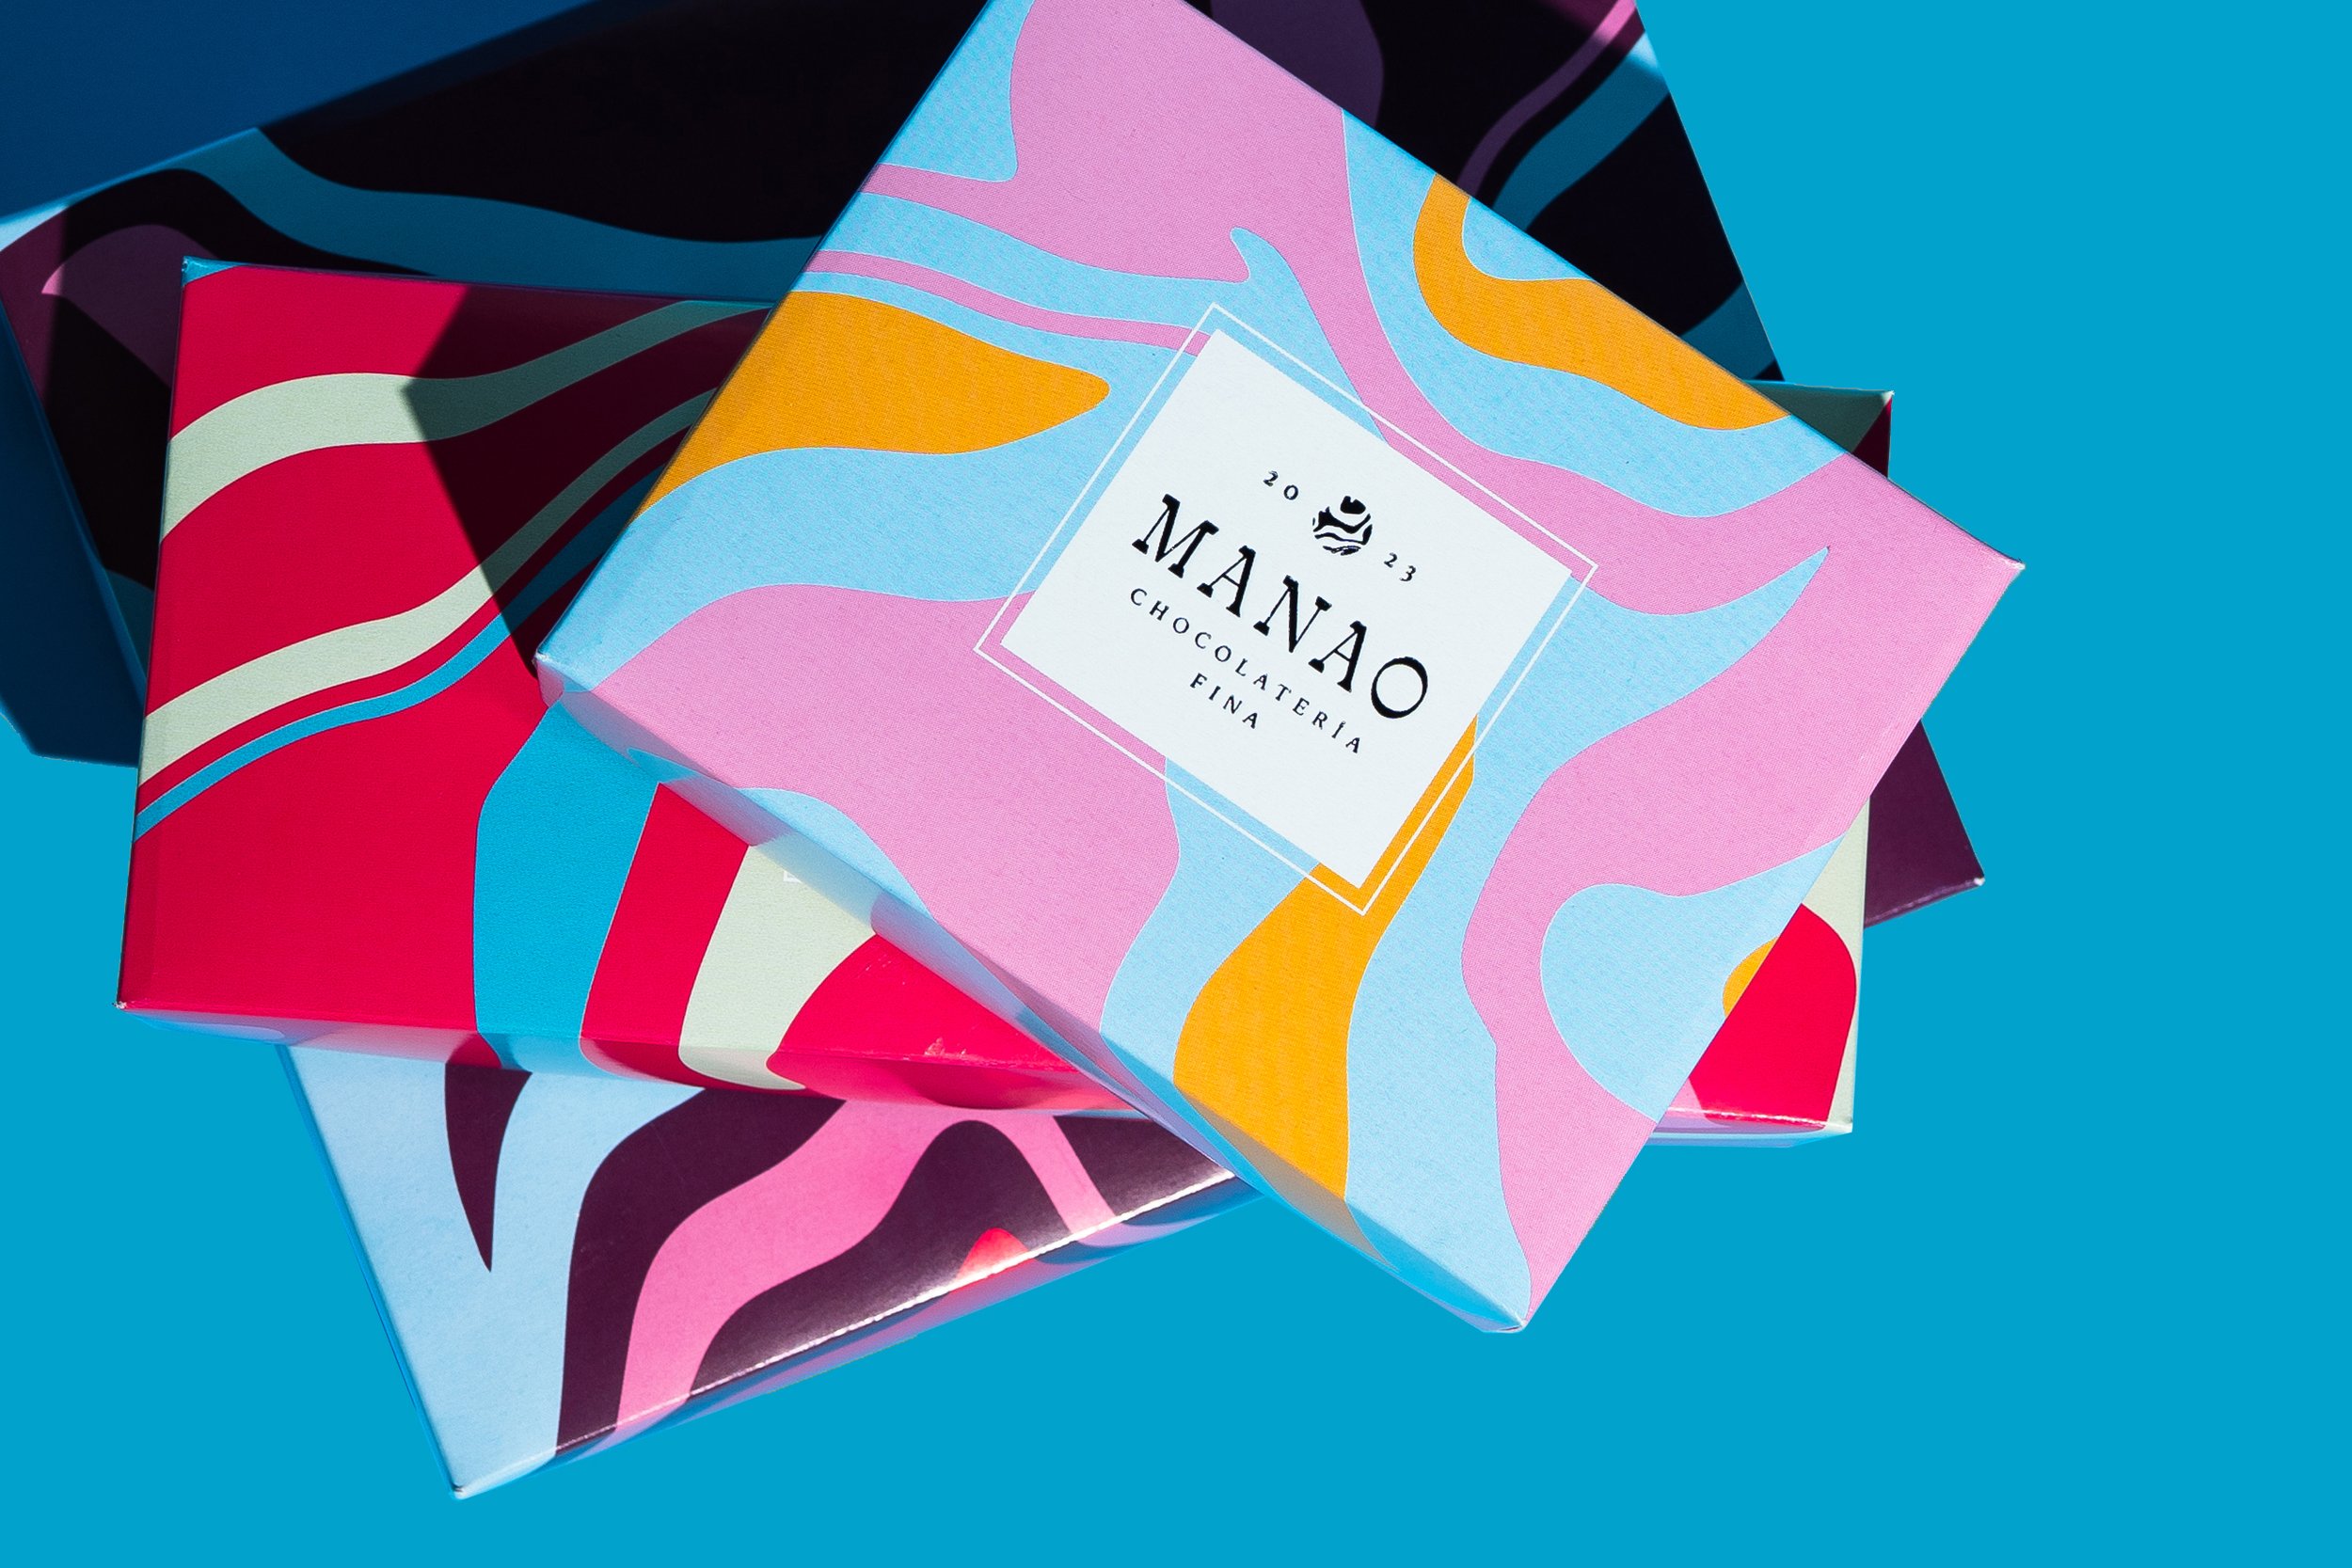 Manao Chocolate Boutique Branding Logo and Packaging Design by Caracter studio 3b.jpg